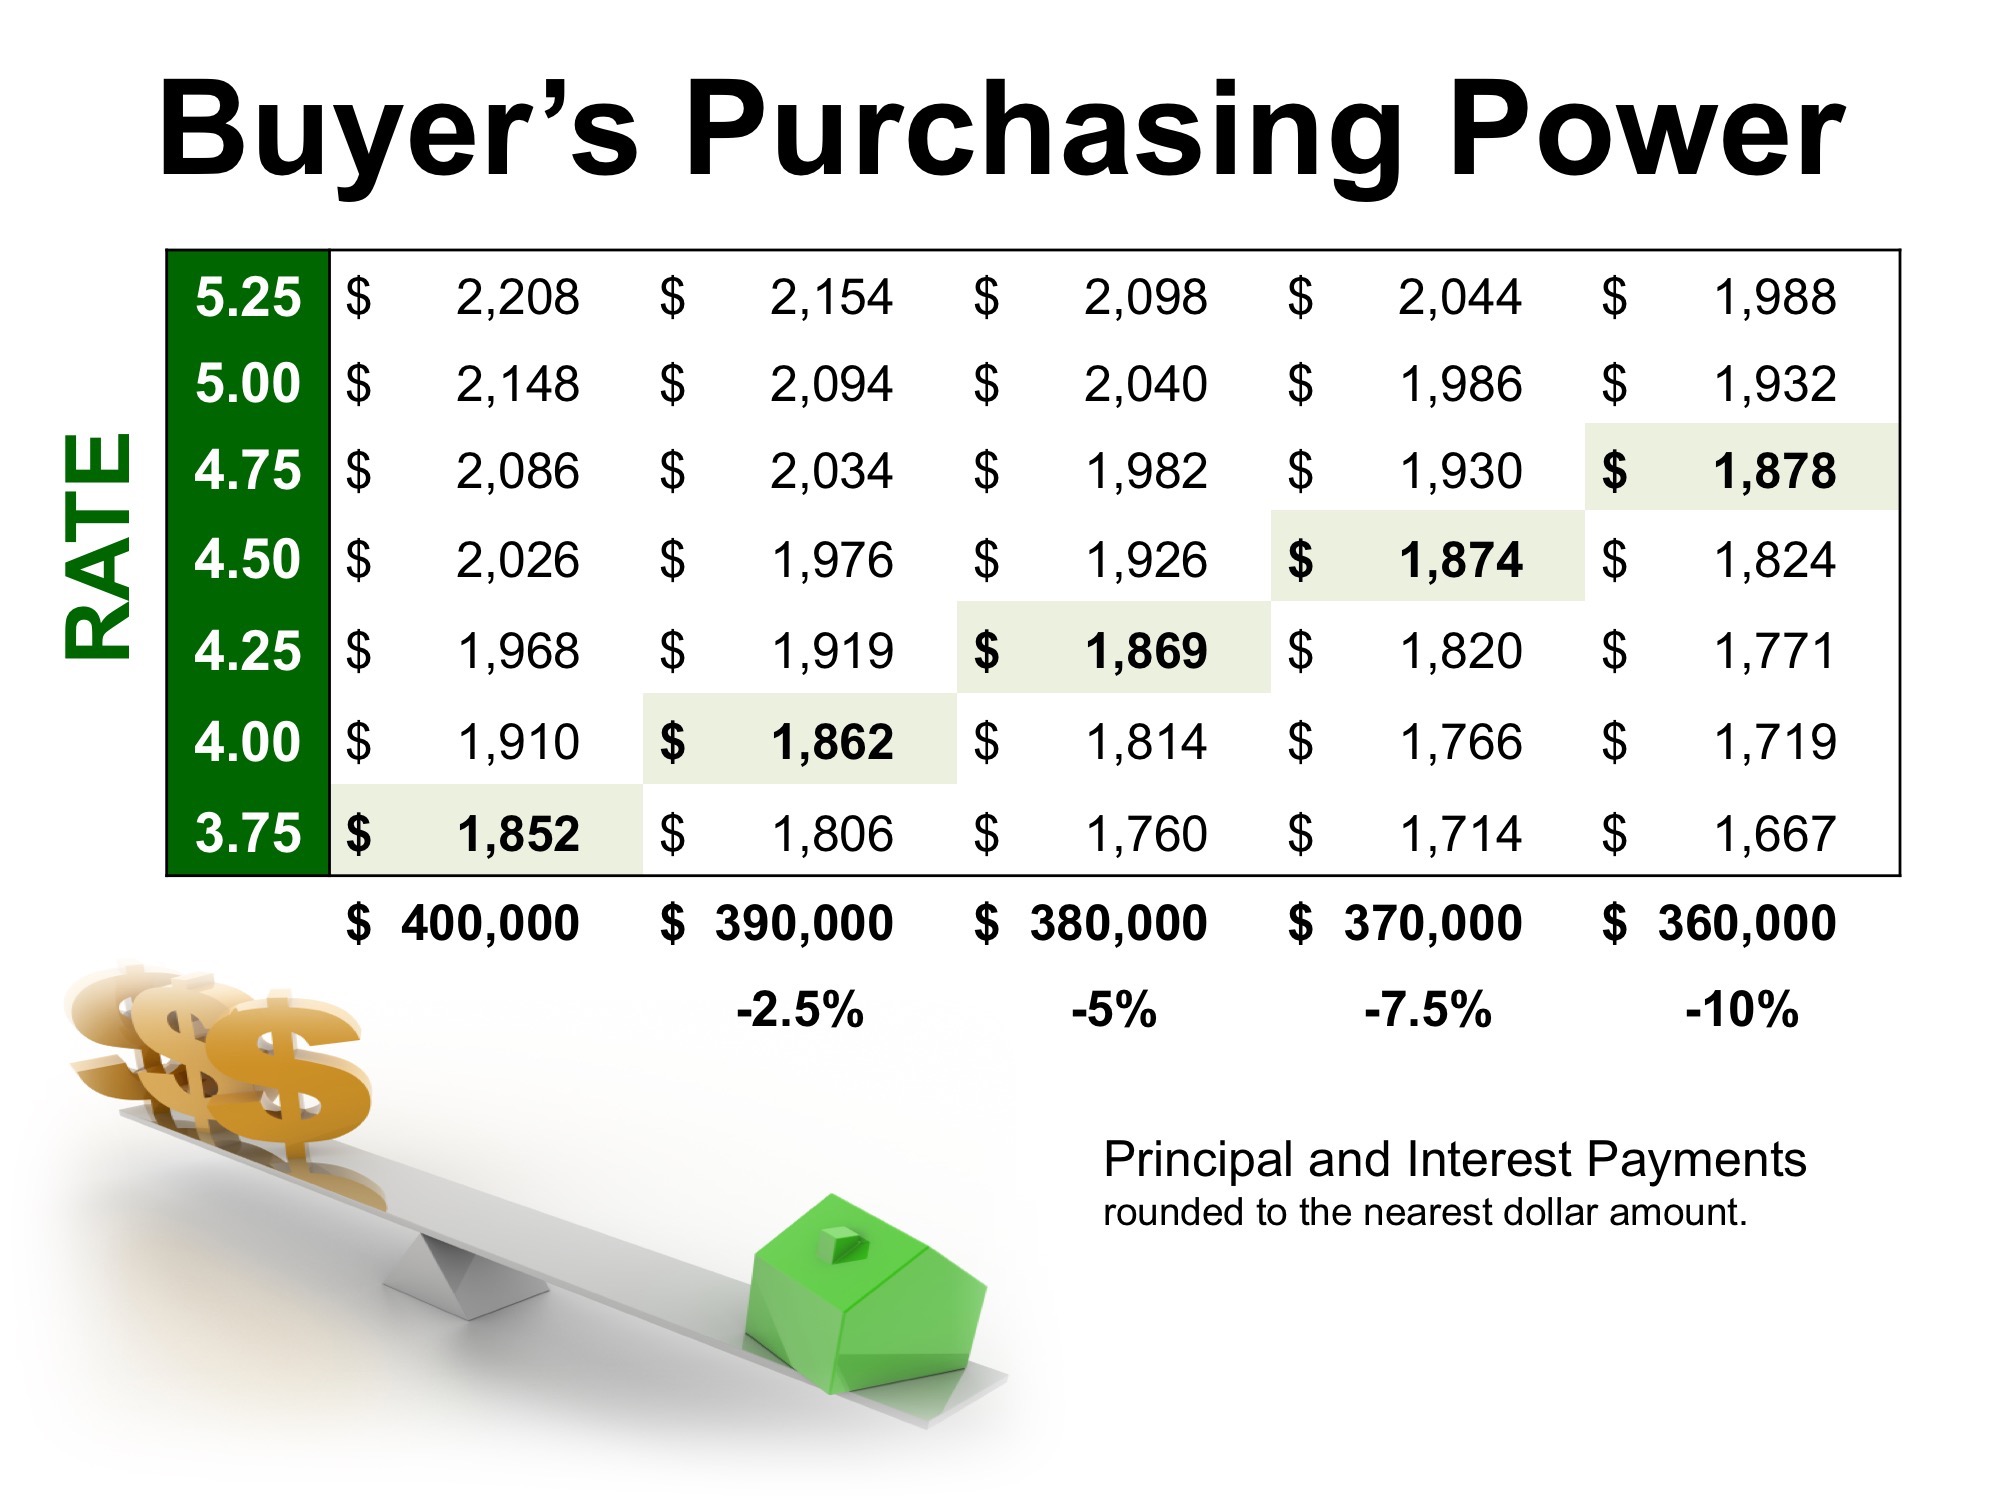 Low Interest Rates Have a High Impact on Your Purchasing Power | MyKCM